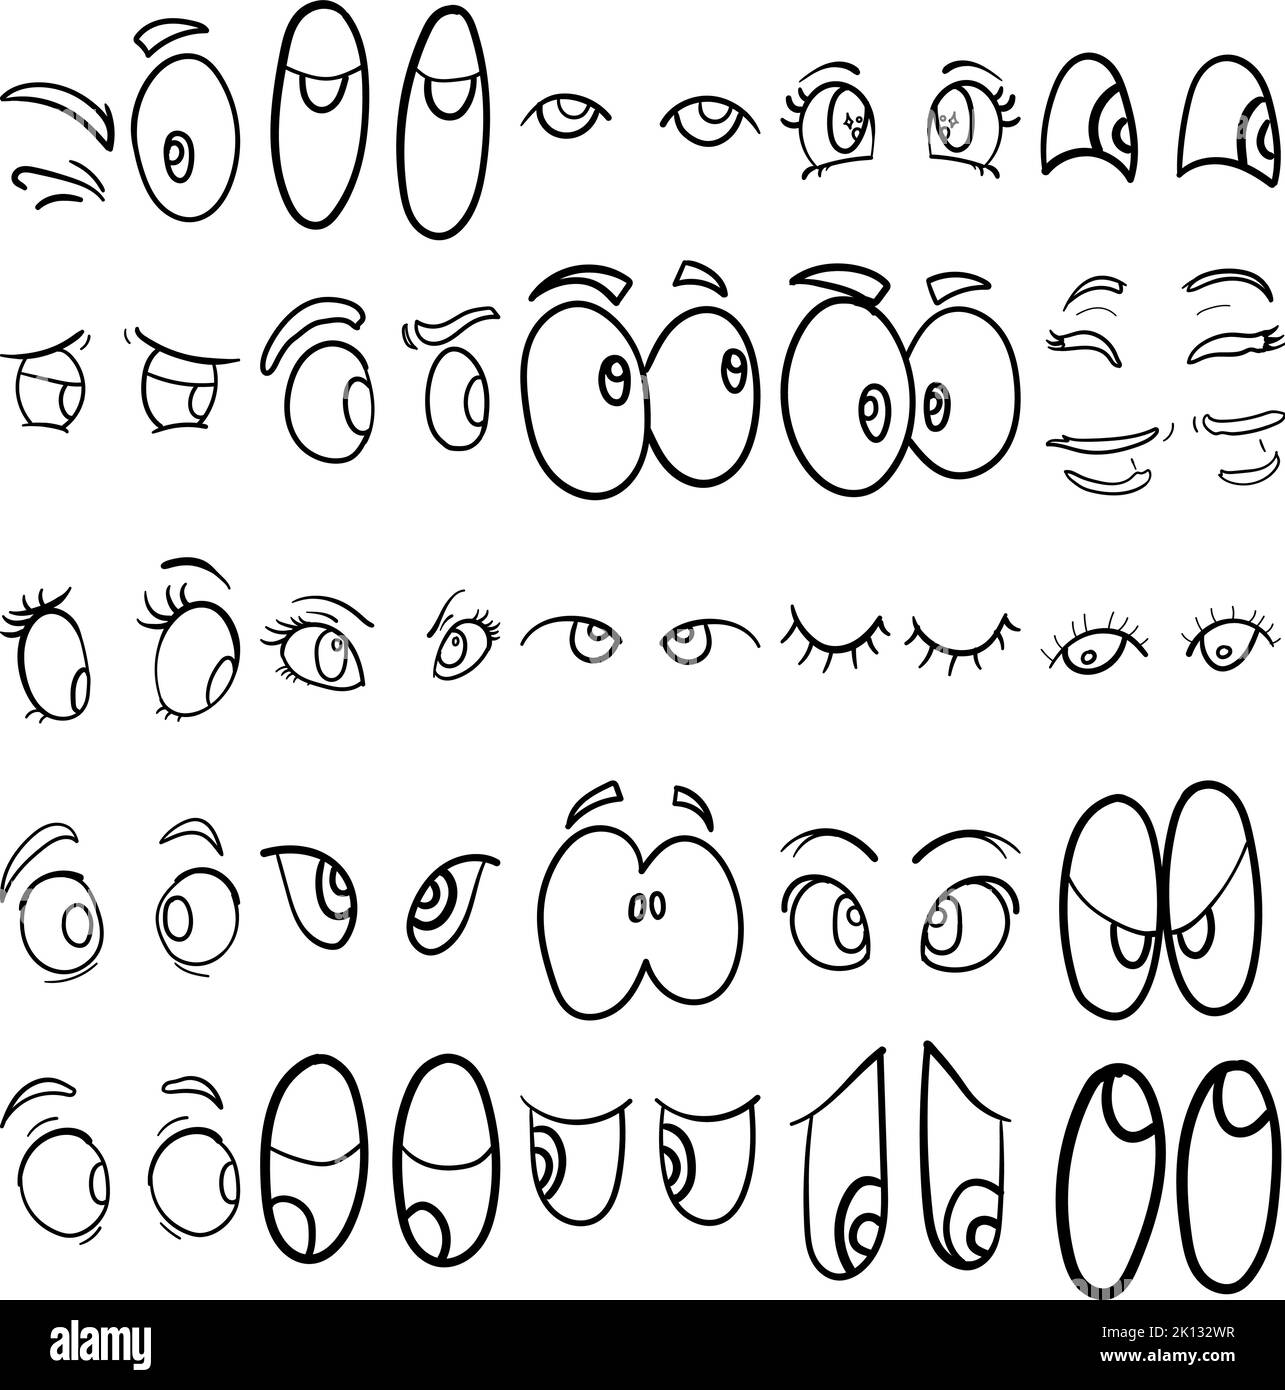 Eyes Hand Drawn Doodle Line Art Outline Set Containing Eyes, Optic, Eyes expression, Eyes body language, Looking up, Looking down, Looking sideways Stock Vector